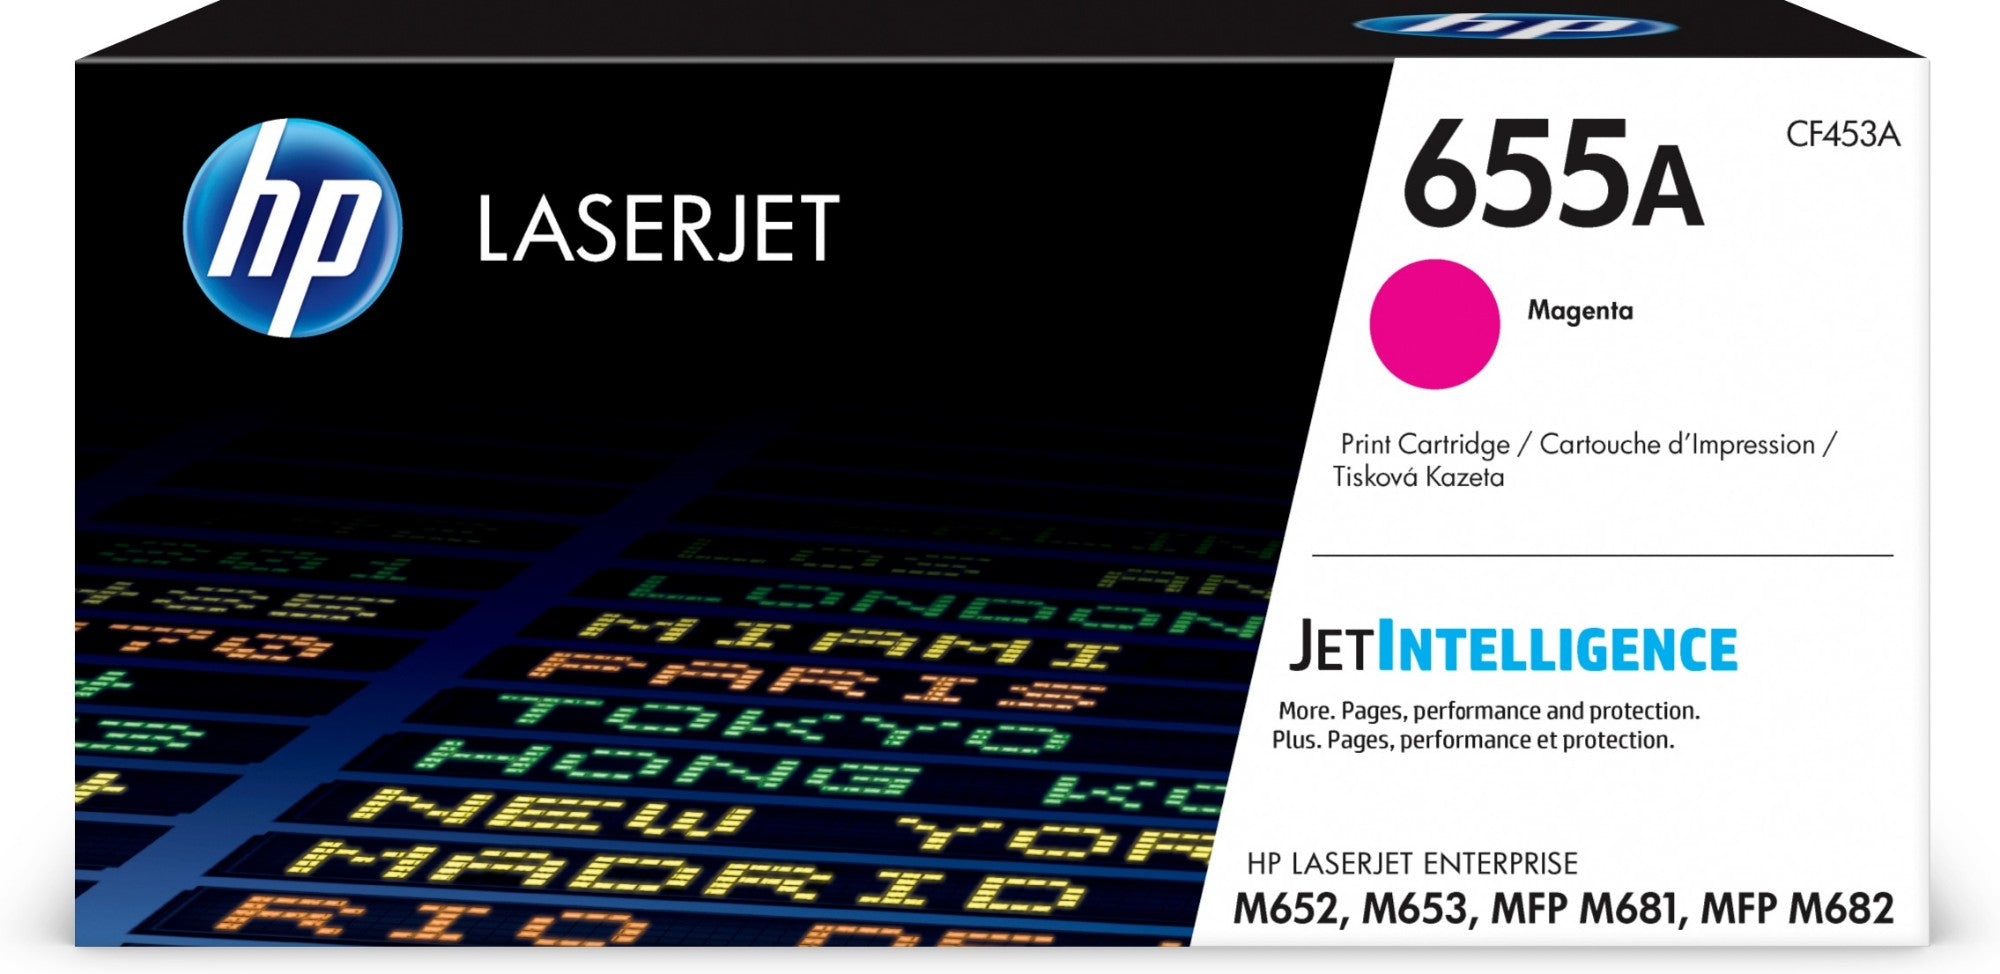 HP CF453A/655A Toner cartridge magenta, 10.5K pages ISO/IEC 19752 for HP LaserJet M 652/681